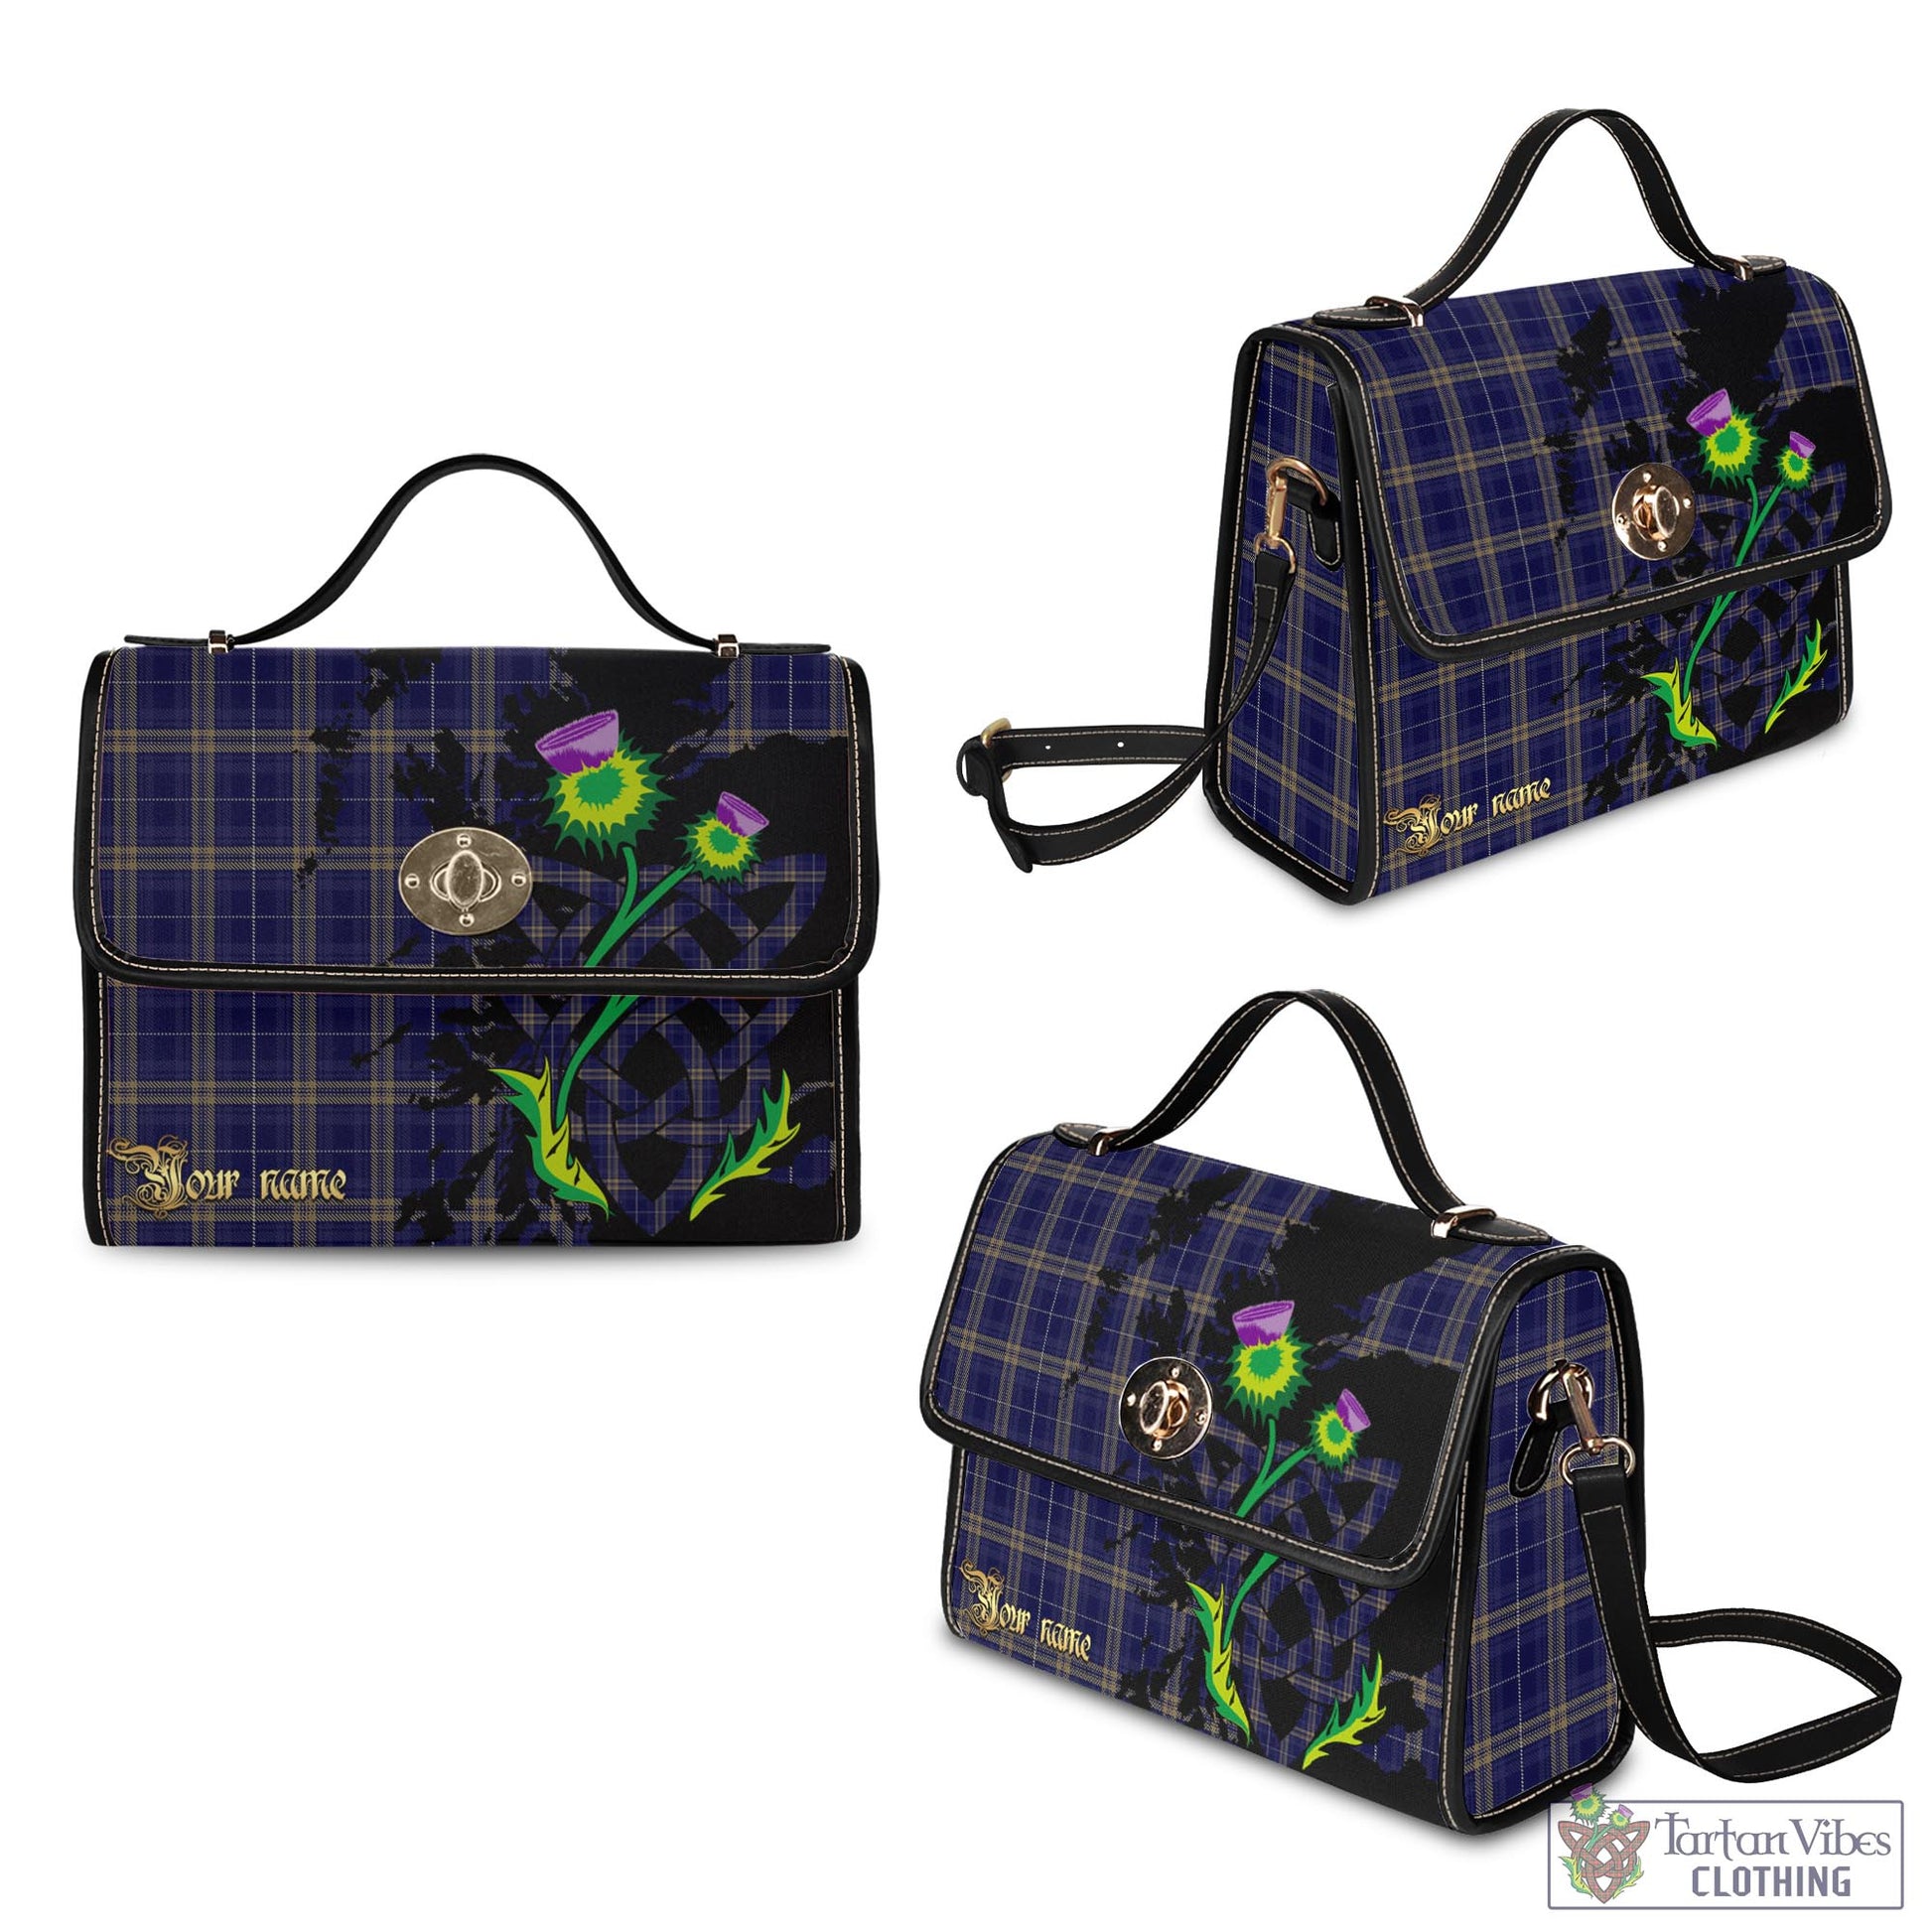 Tartan Vibes Clothing Rhys of Wales Tartan Waterproof Canvas Bag with Scotland Map and Thistle Celtic Accents